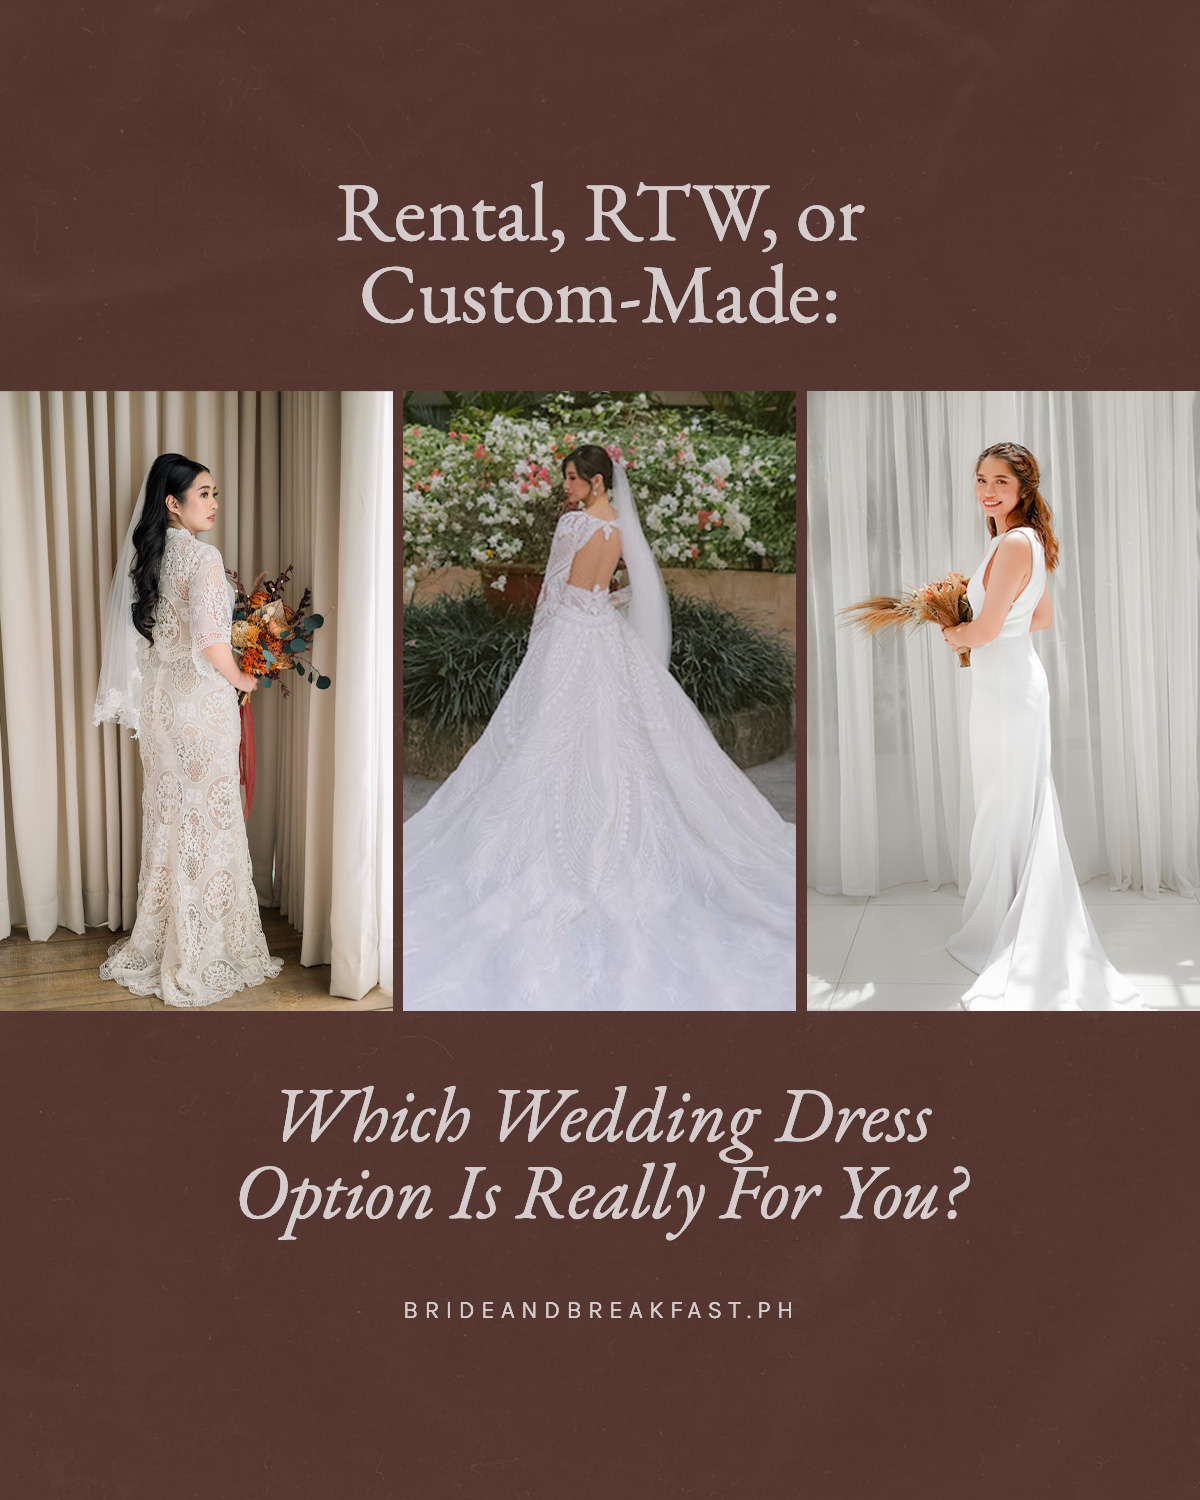 Rental, RTW, or Custom-Made: Which Wedding Dress Option Is Really For You?